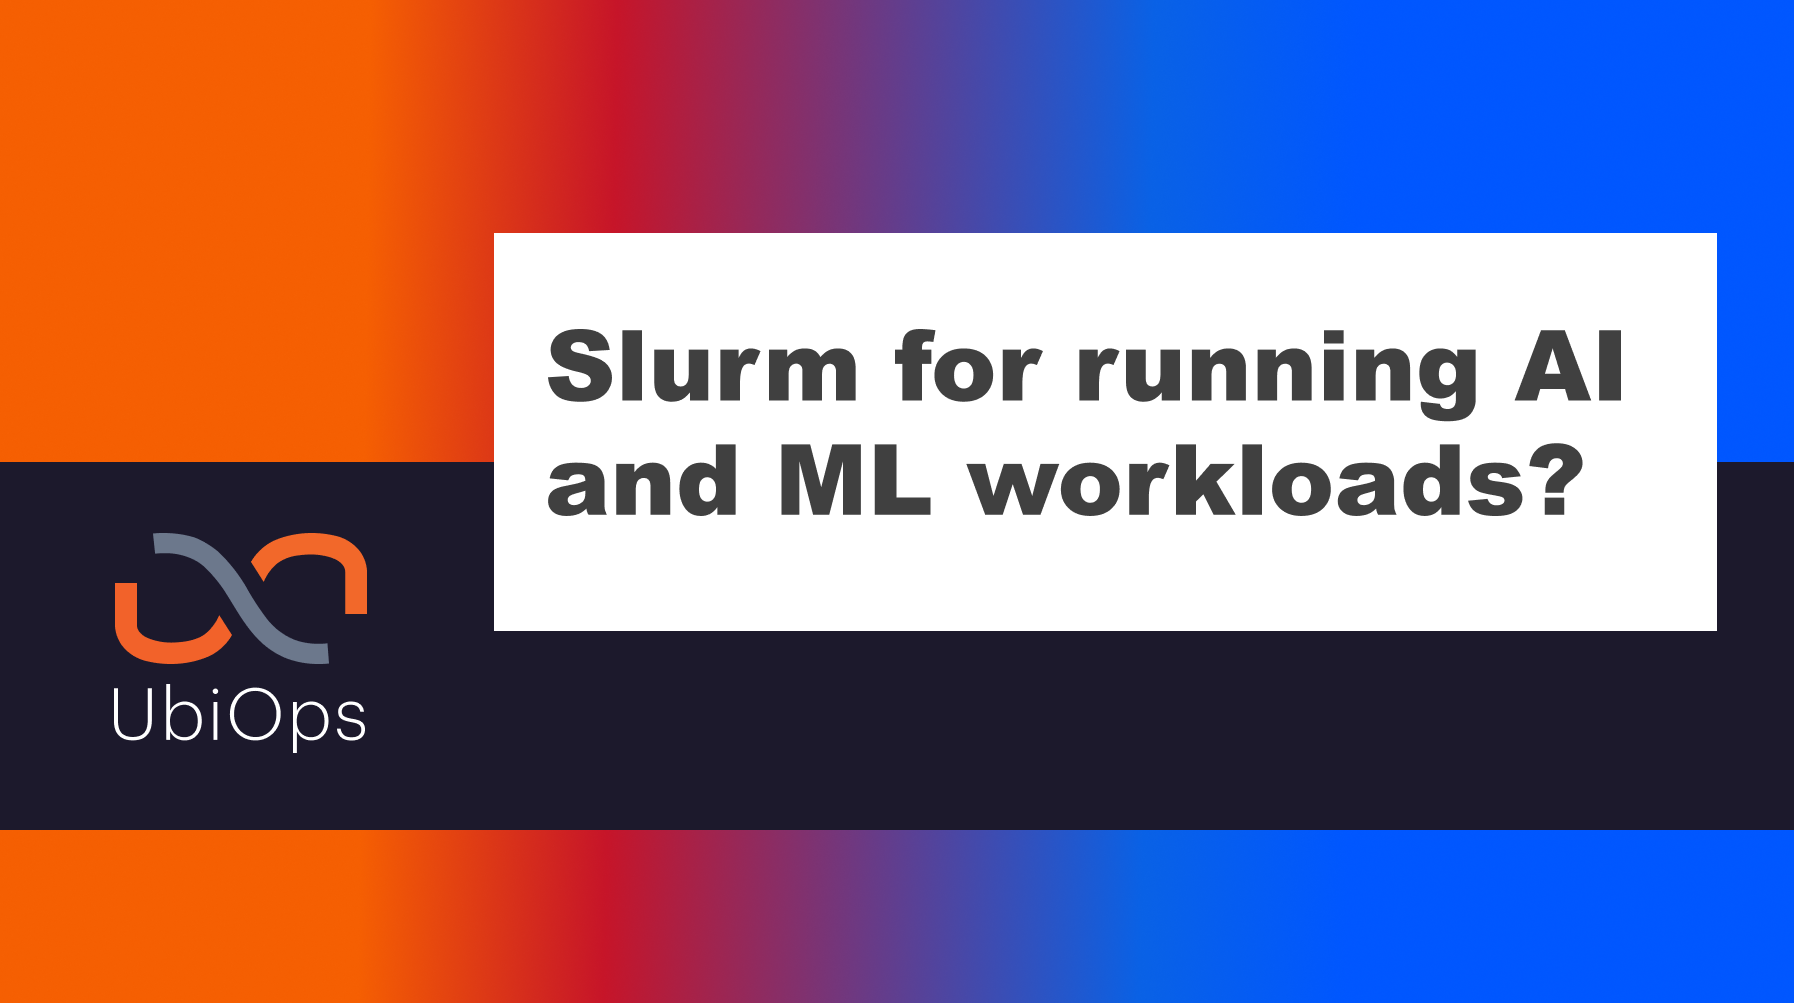 Slurm for running AI and ML workloads